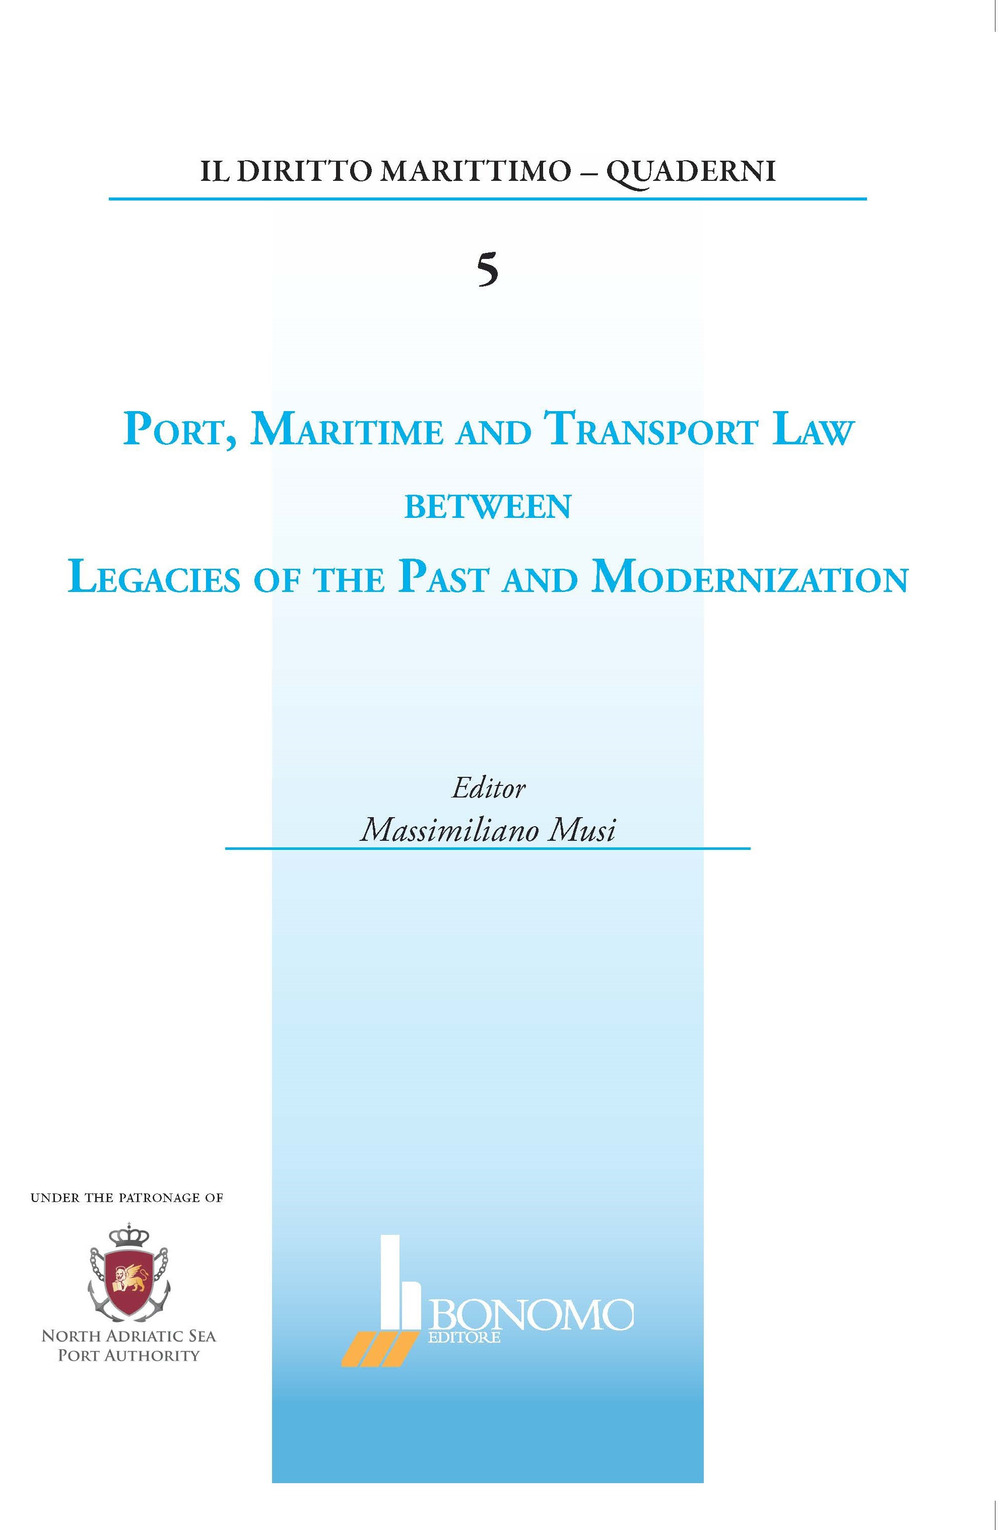 Port, maritime and transport law between legacies of the past and modernization